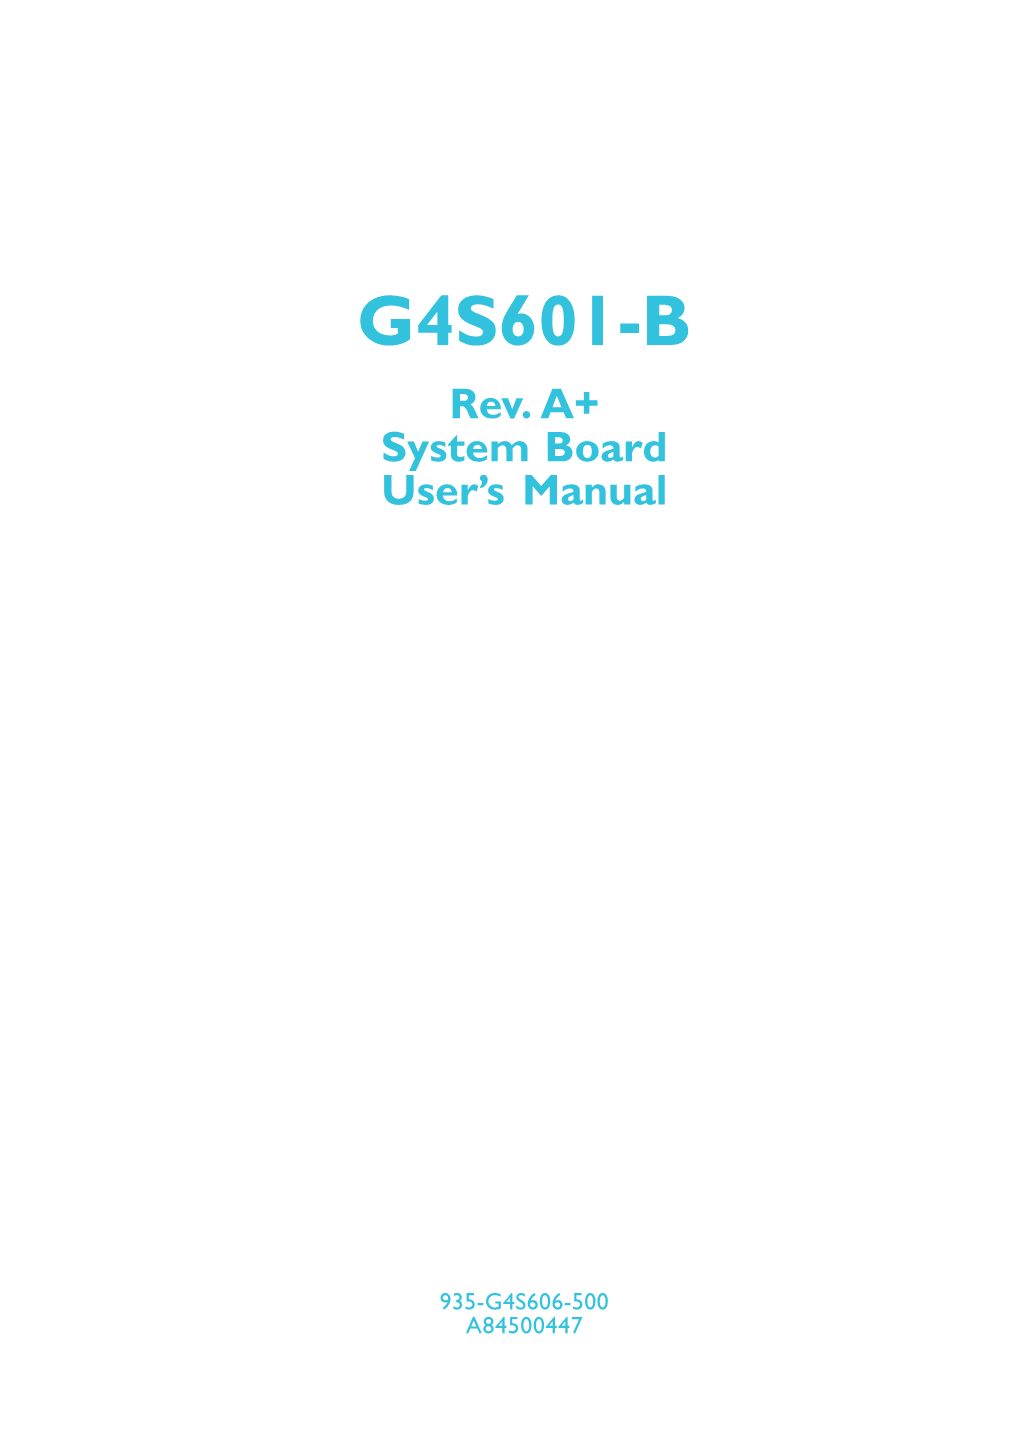 G4s601-B A84500447 1.Pmd